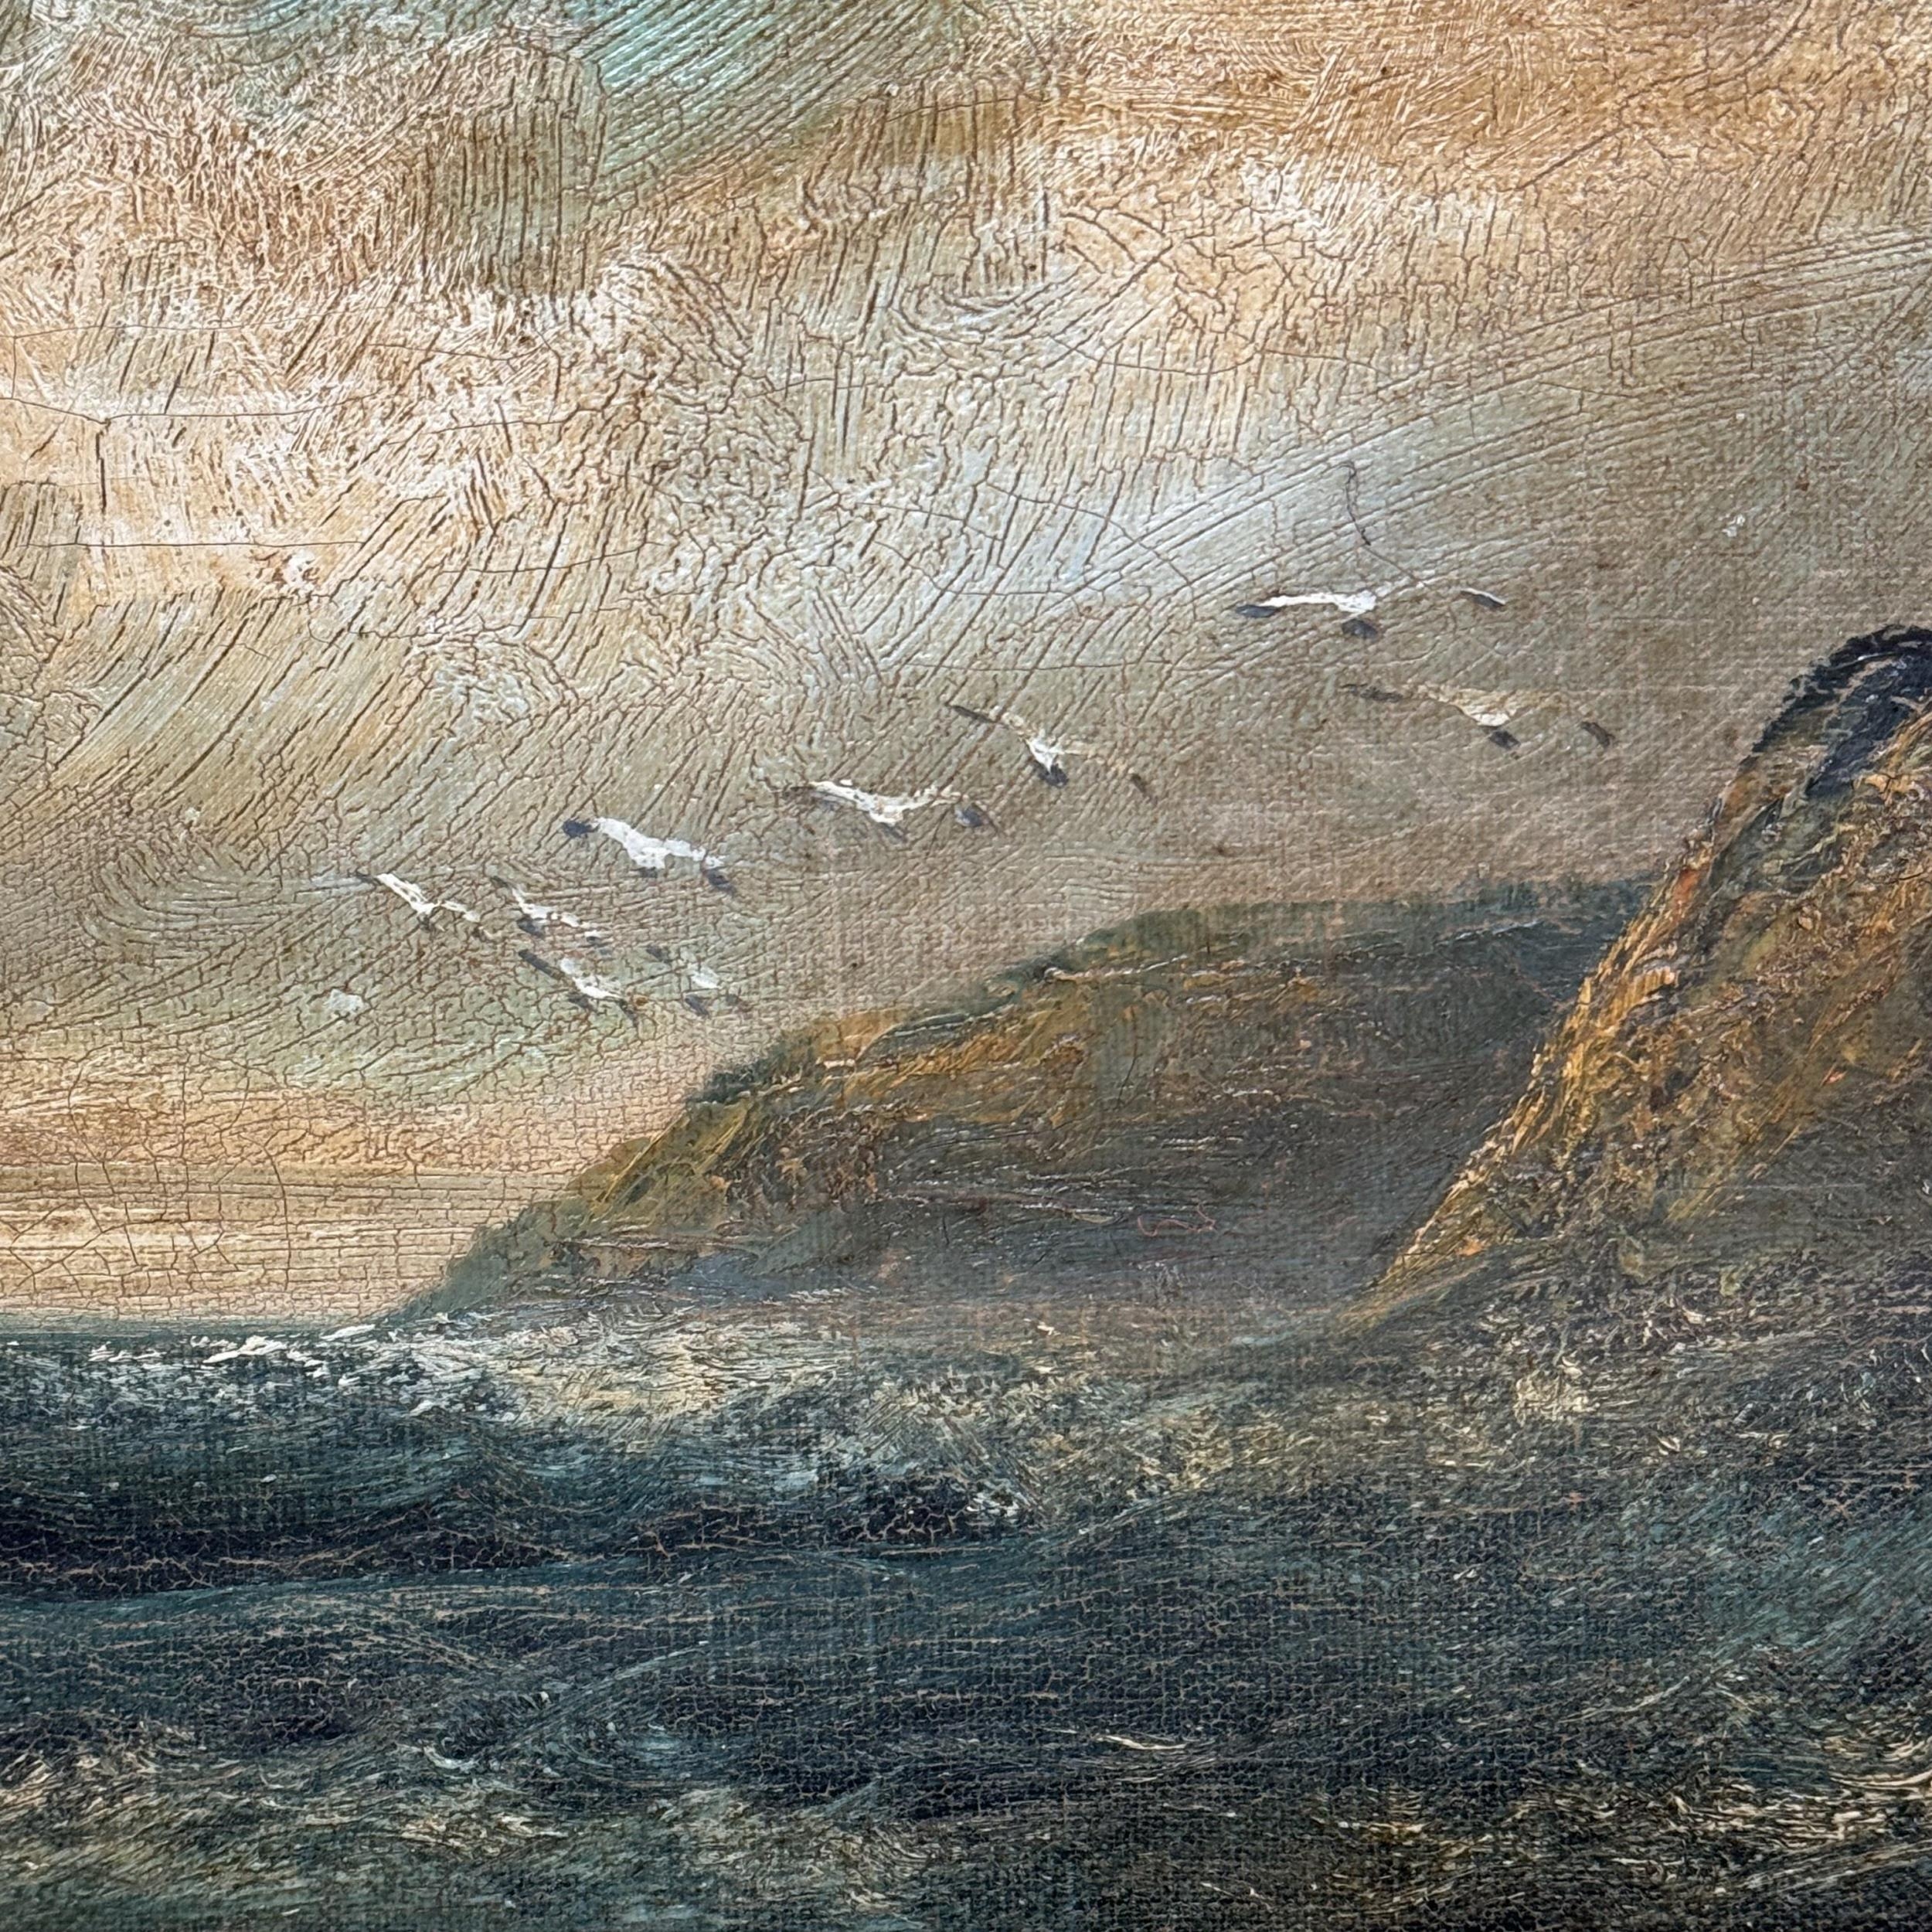 Melville, E (possibly S E Melville), pair of coastal scenes, oil on canvas, 20.5cm x 41cm together - Image 3 of 3